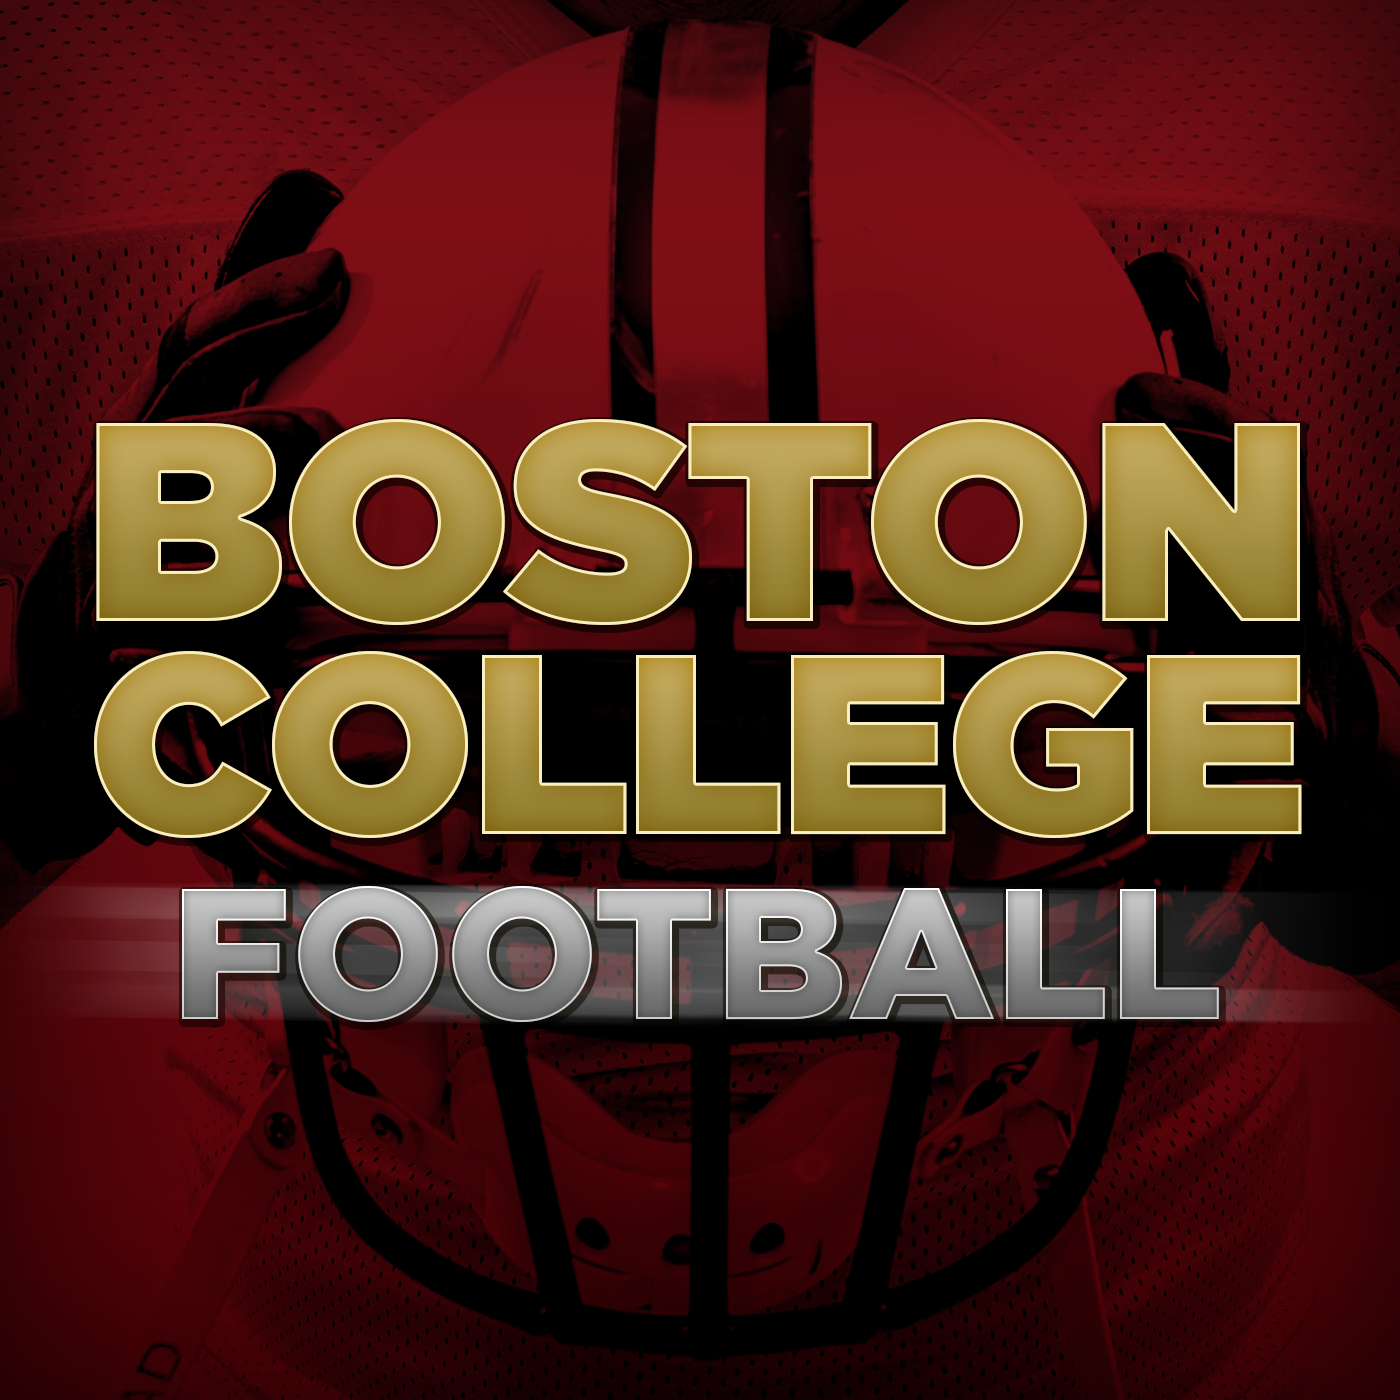 Boston College Coaches Show: Steve Addazio on the tough loss to NC State